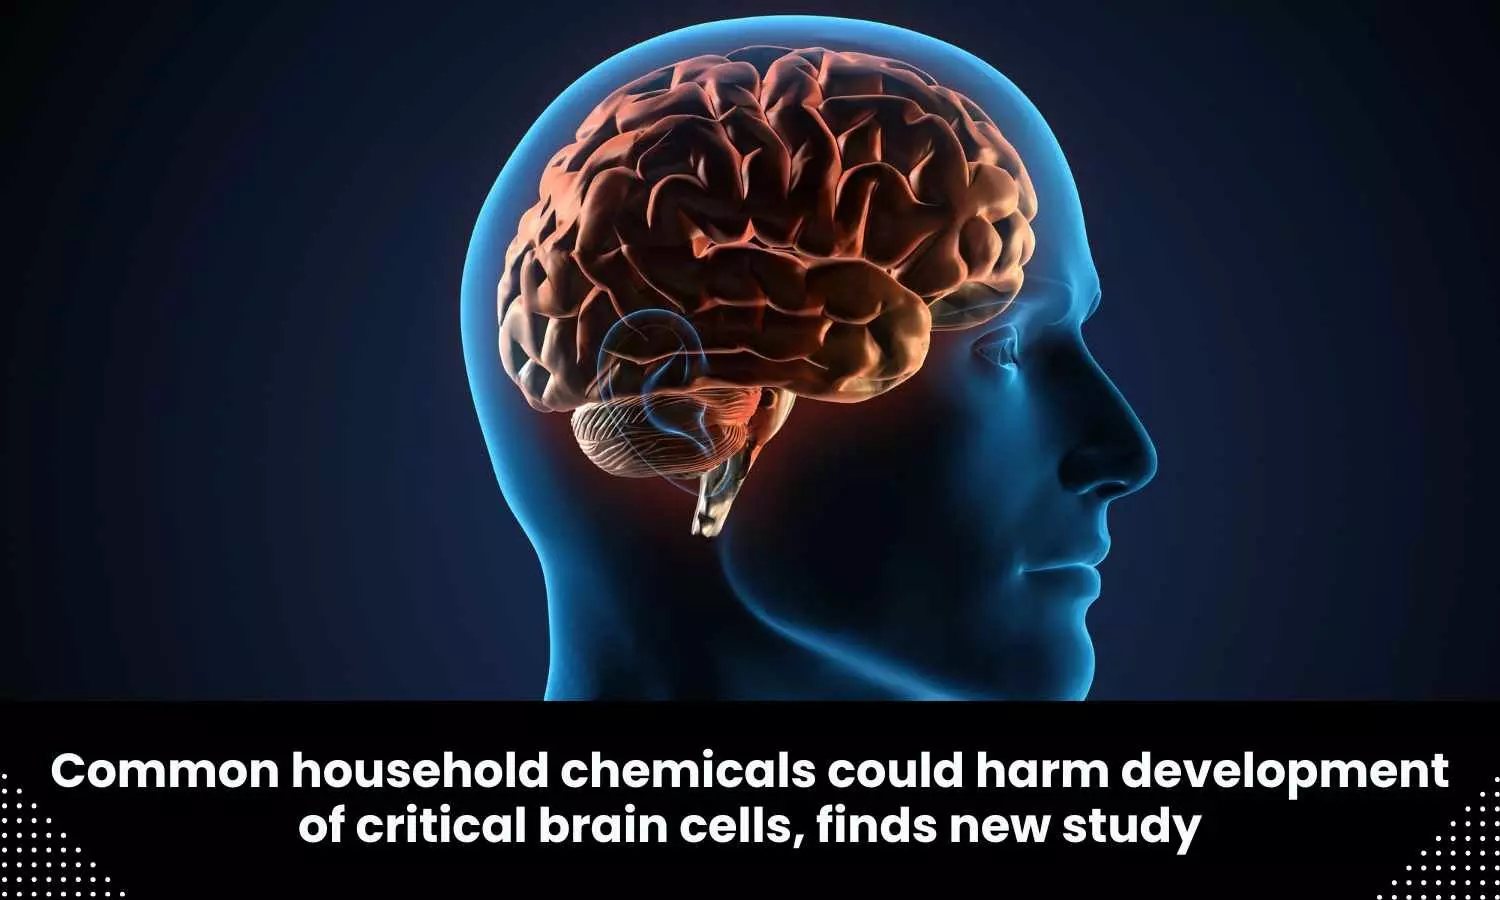 Study finds common household chemicals could harm development of critical brain cells